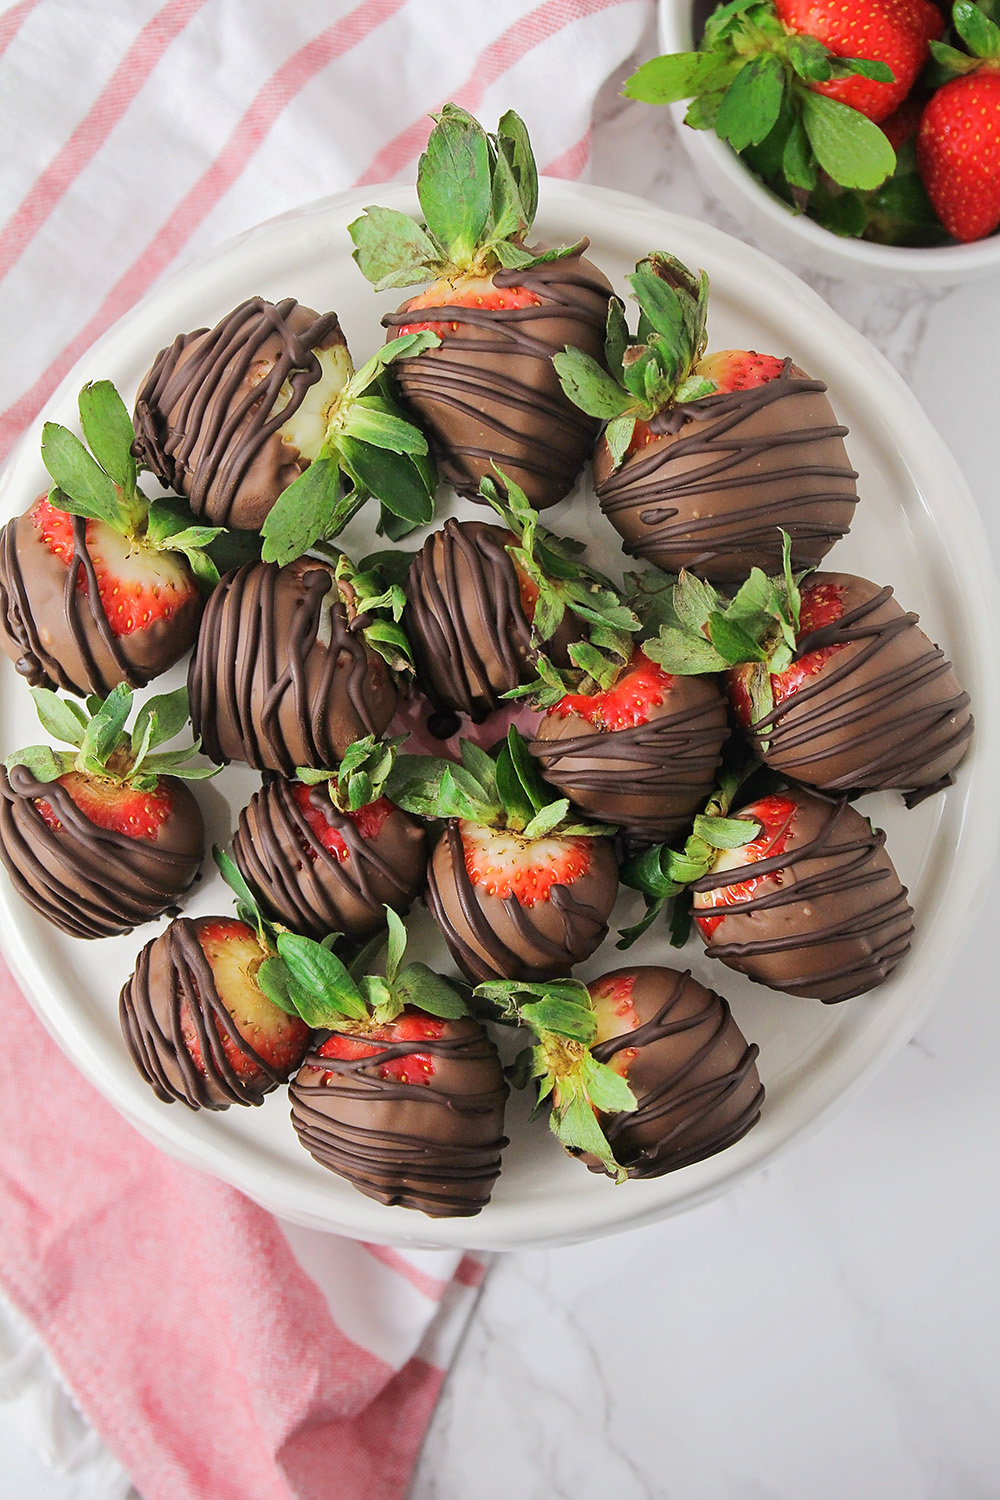 These homemade chocolate covered strawberries are so easy to make and so delicious! They're the perfect romantic dessert for Valentine's Day!